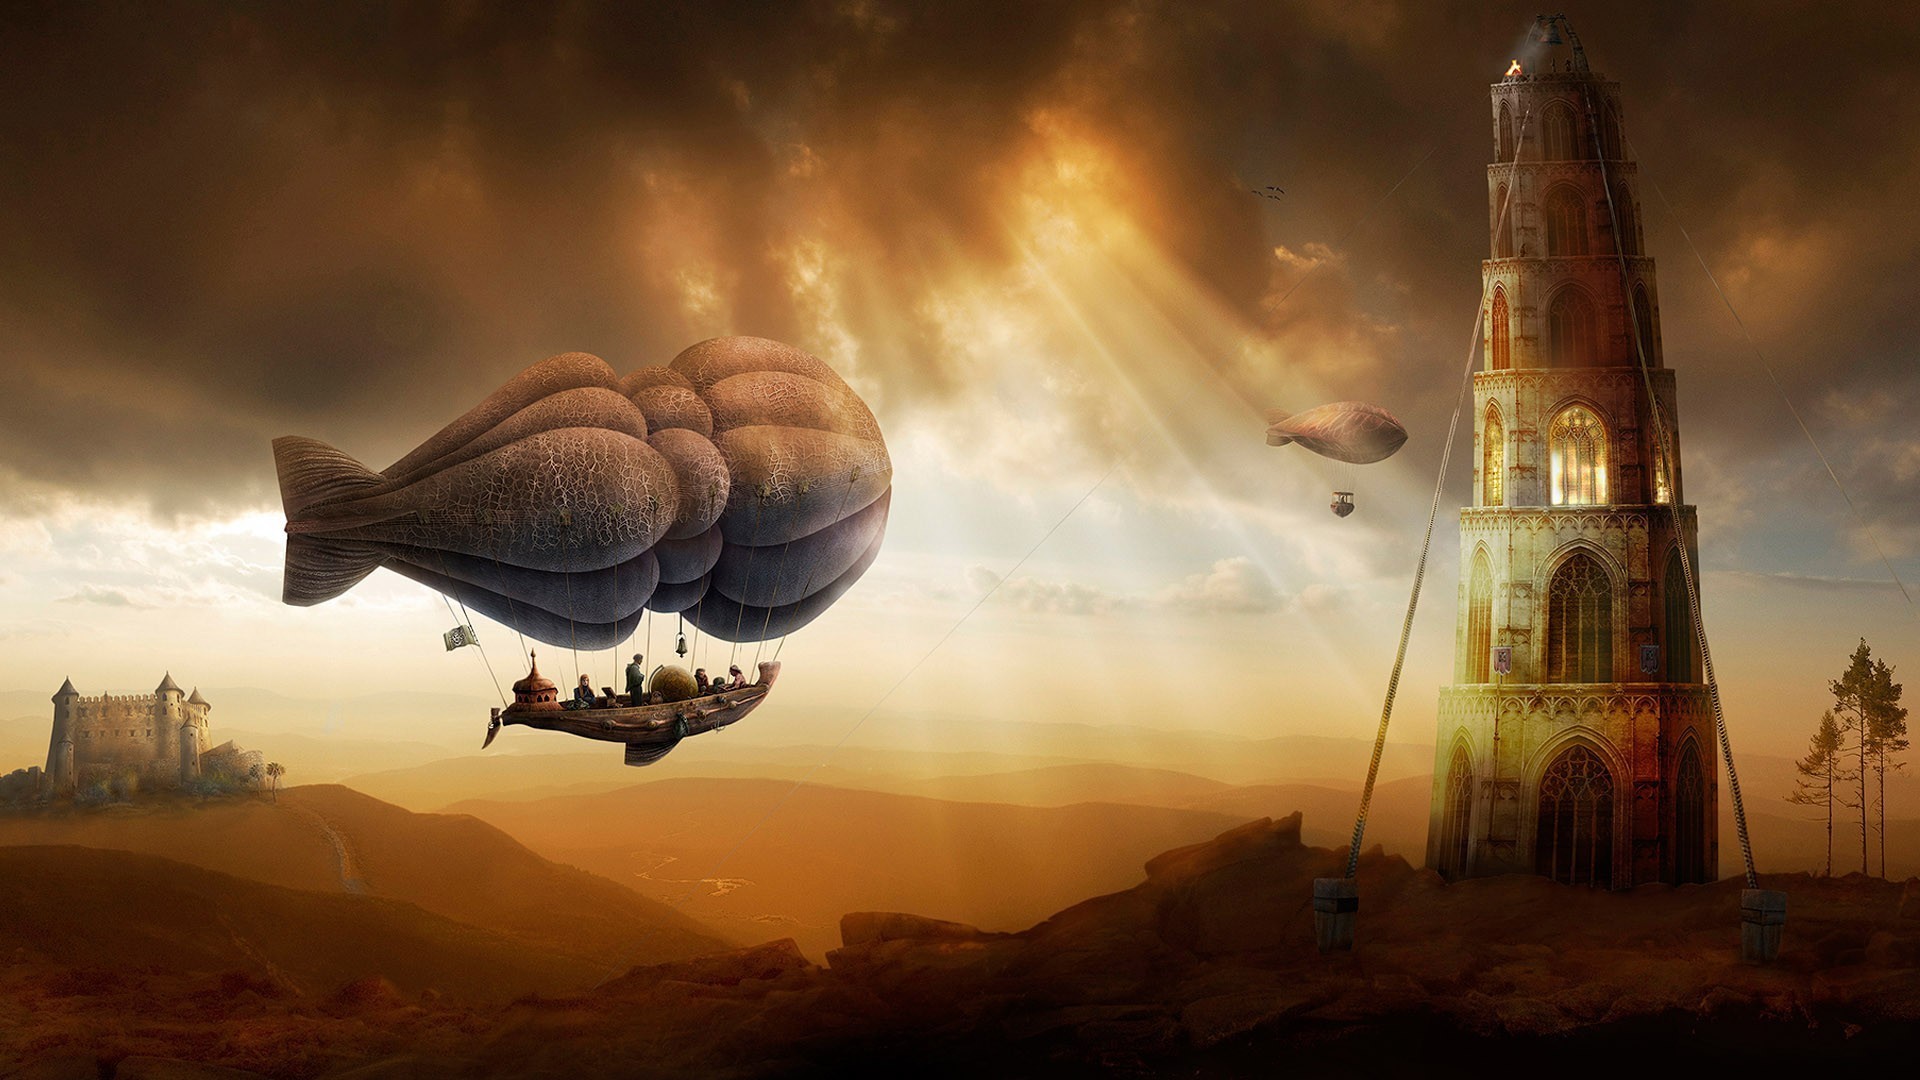 digital Art, Fantasy Art, Nature, Painting, Zeppelin, People, Trees, Tower, Castle, Hill, Clouds, Sun Rays, Landscape, Ropes, Hot Air Balloons, Airships, Flying Wallpaper